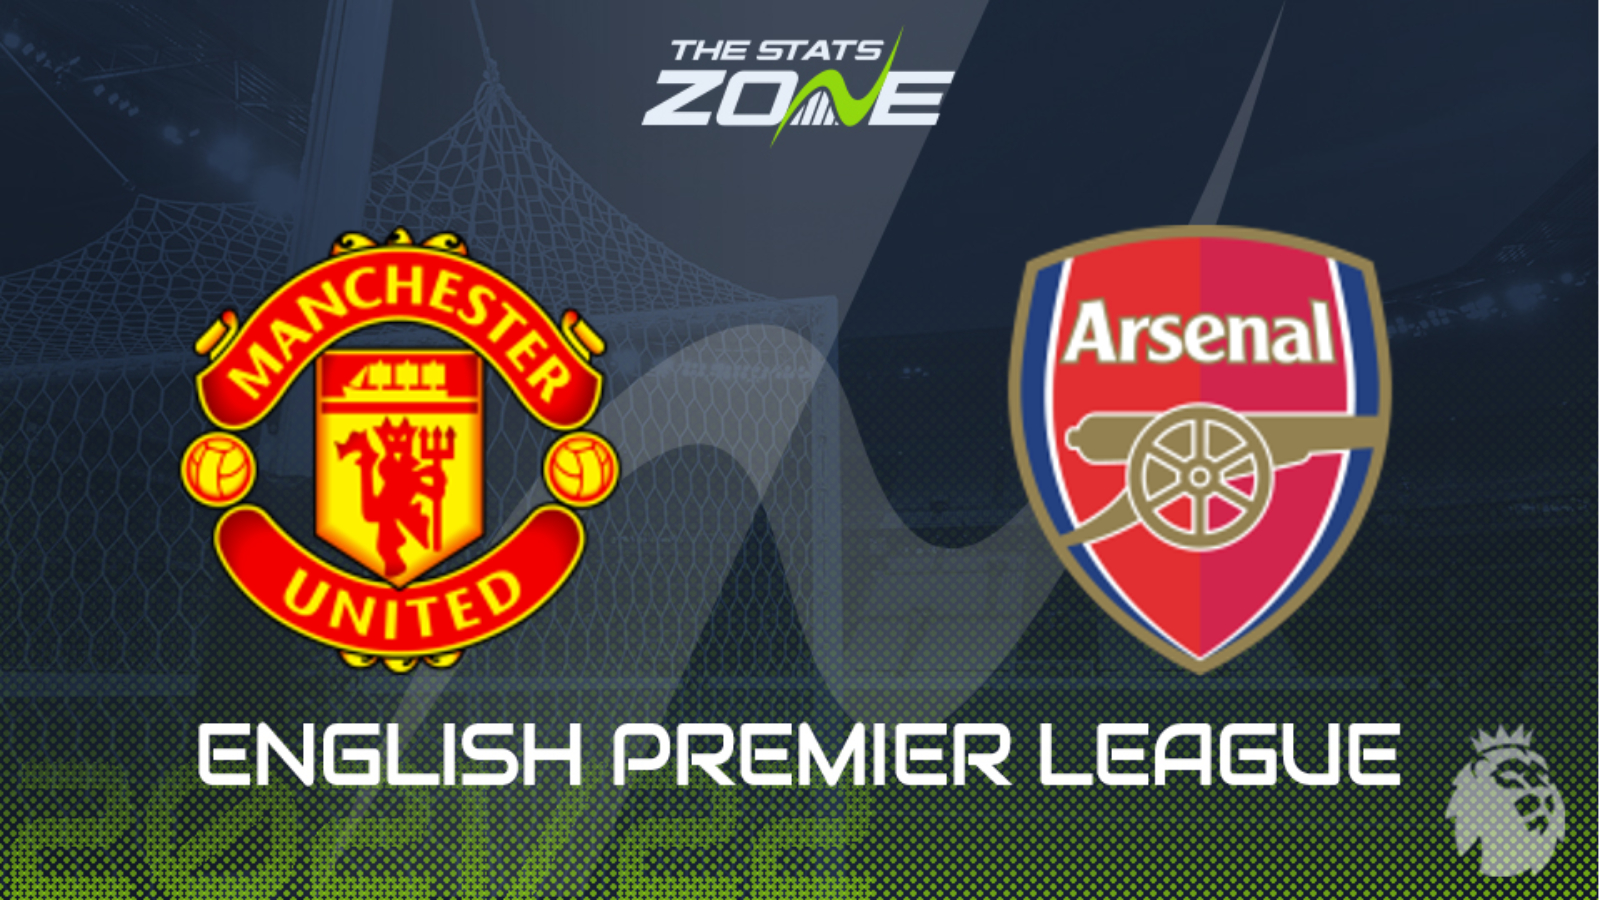 EPL Predictions: My Best Bet for Arsenal vs. Manchester United